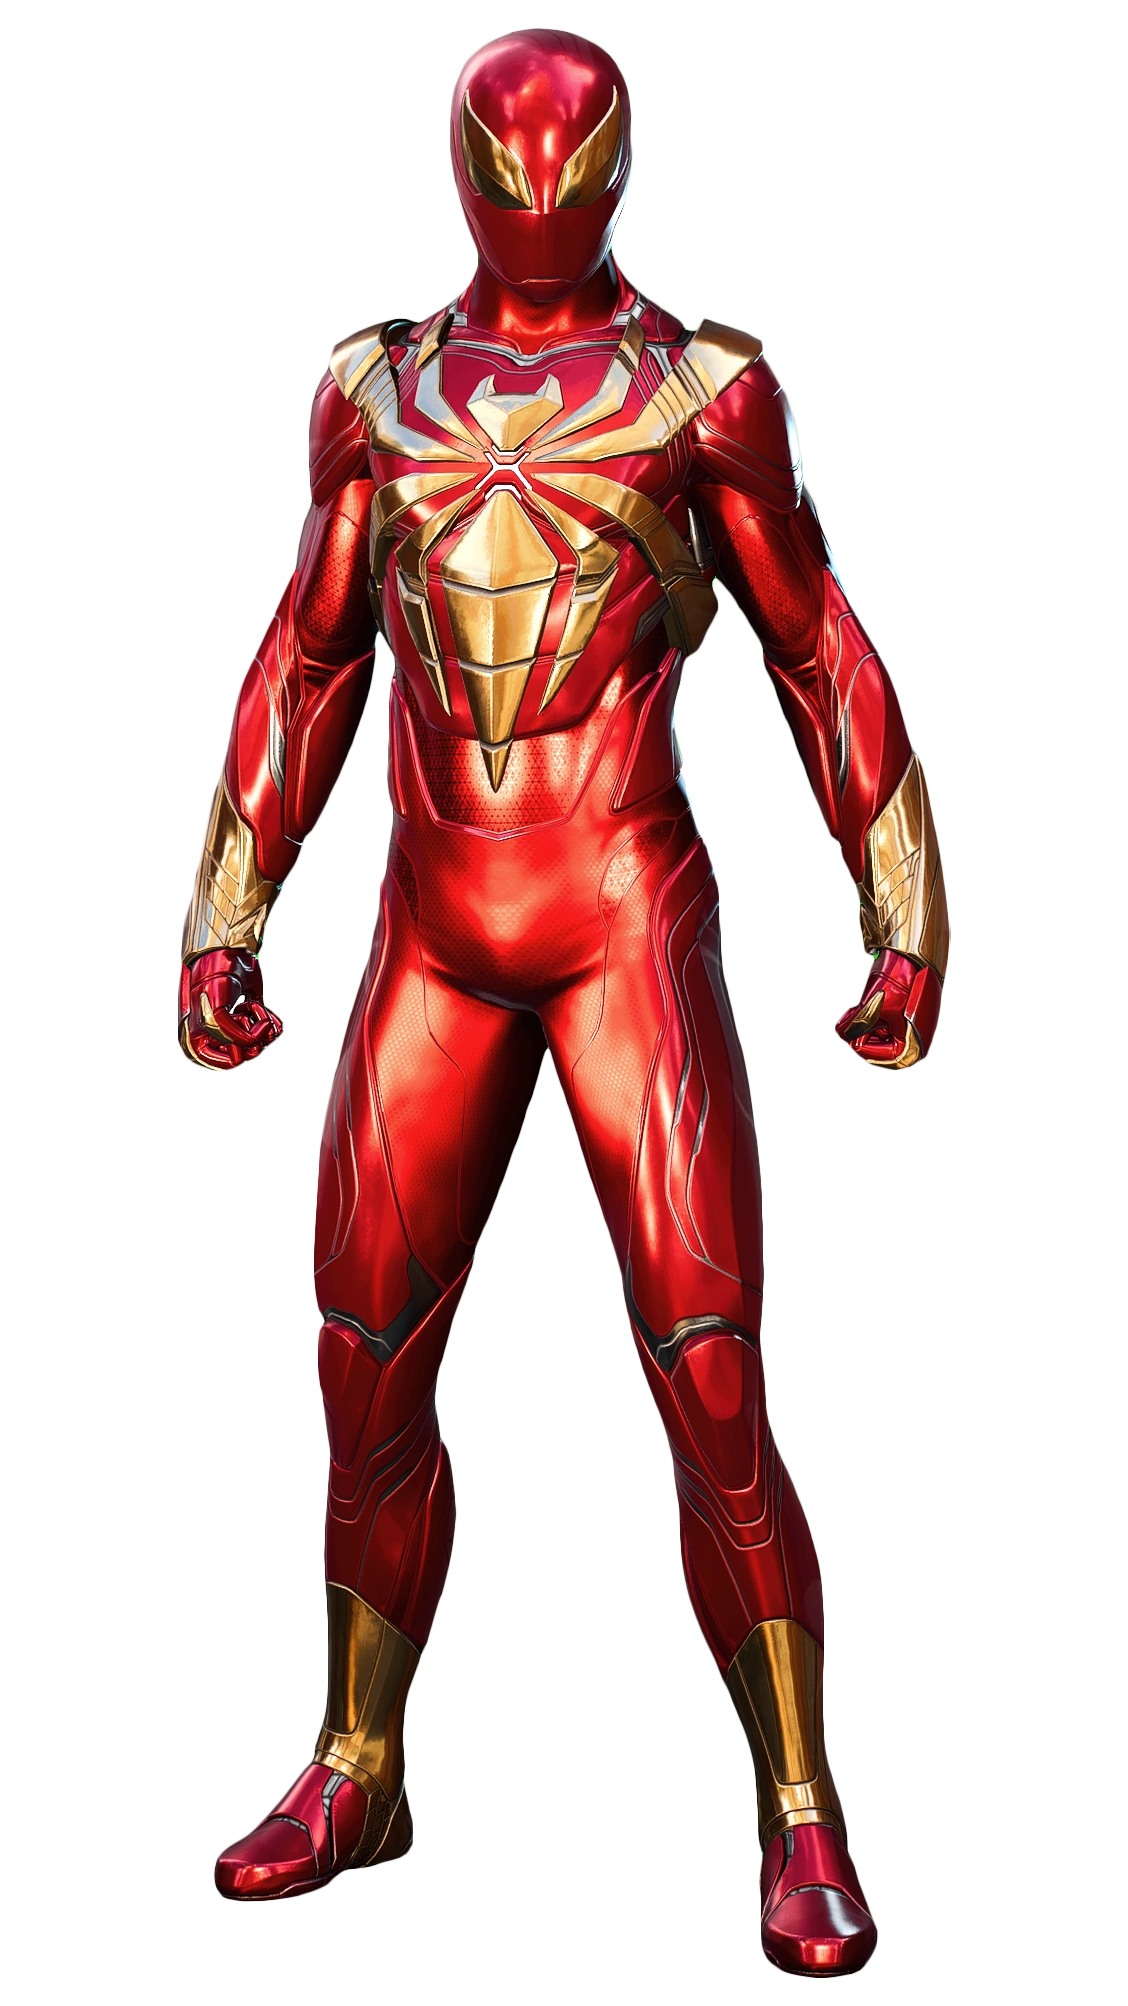 Share more than 146 iron spider suit comics super hot